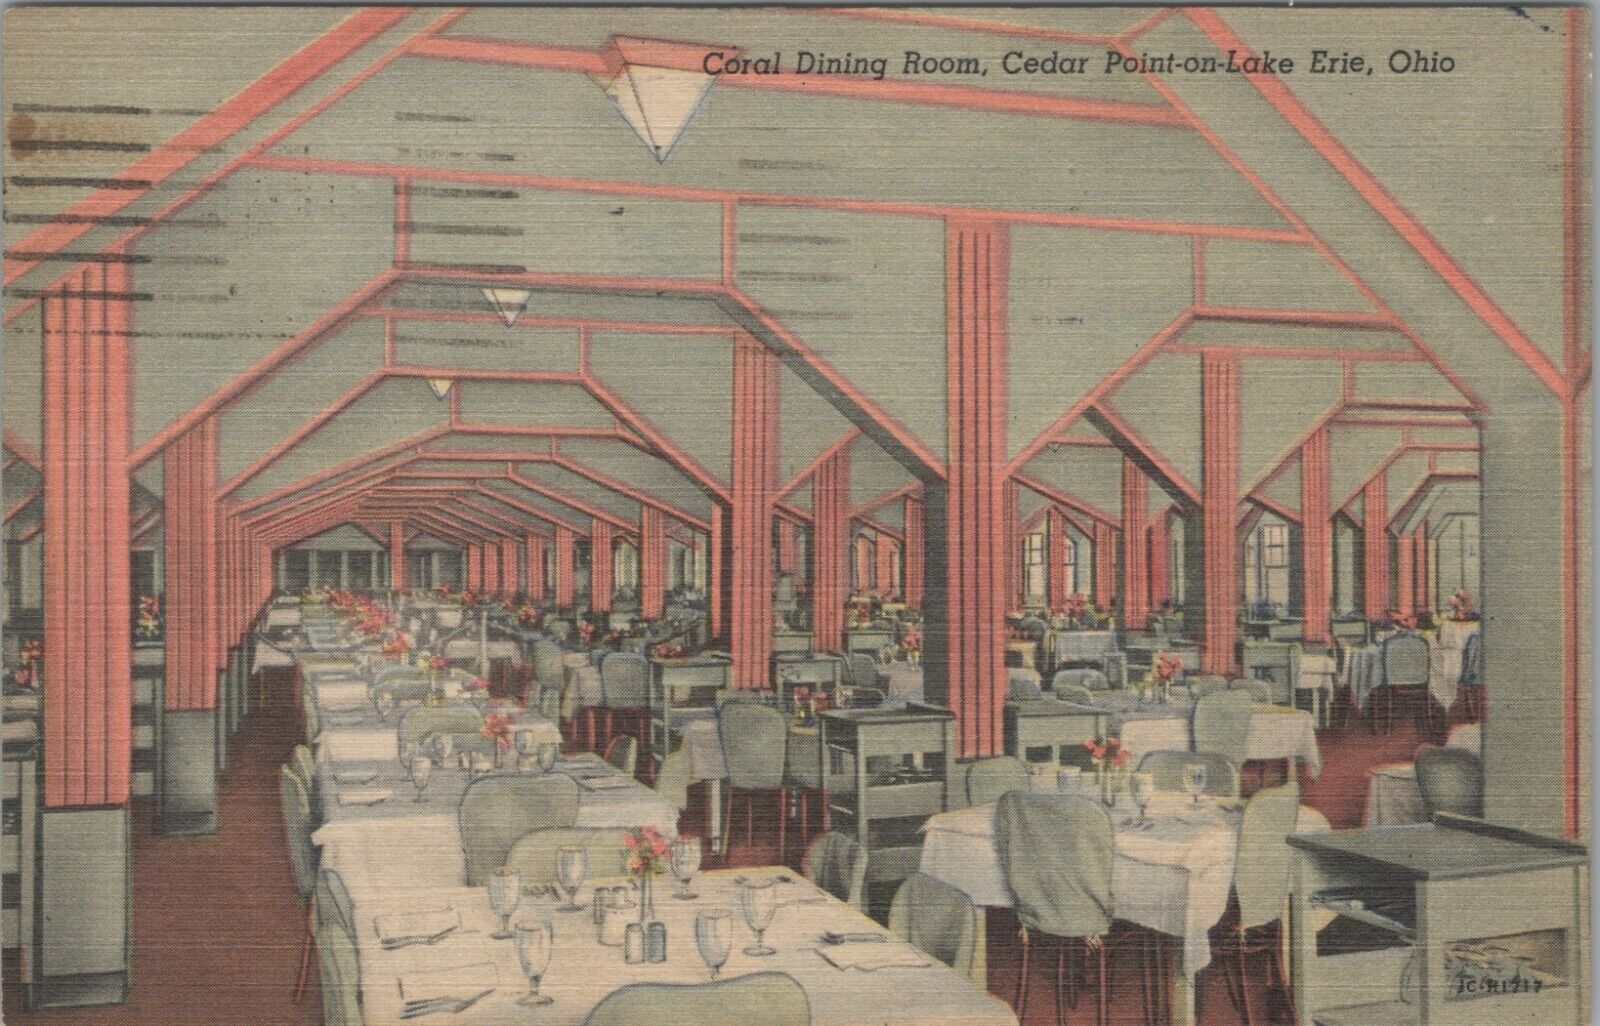 Coral Dining Room Cedar Point on Lake Erie Ohio OH interior 1950s linen F986